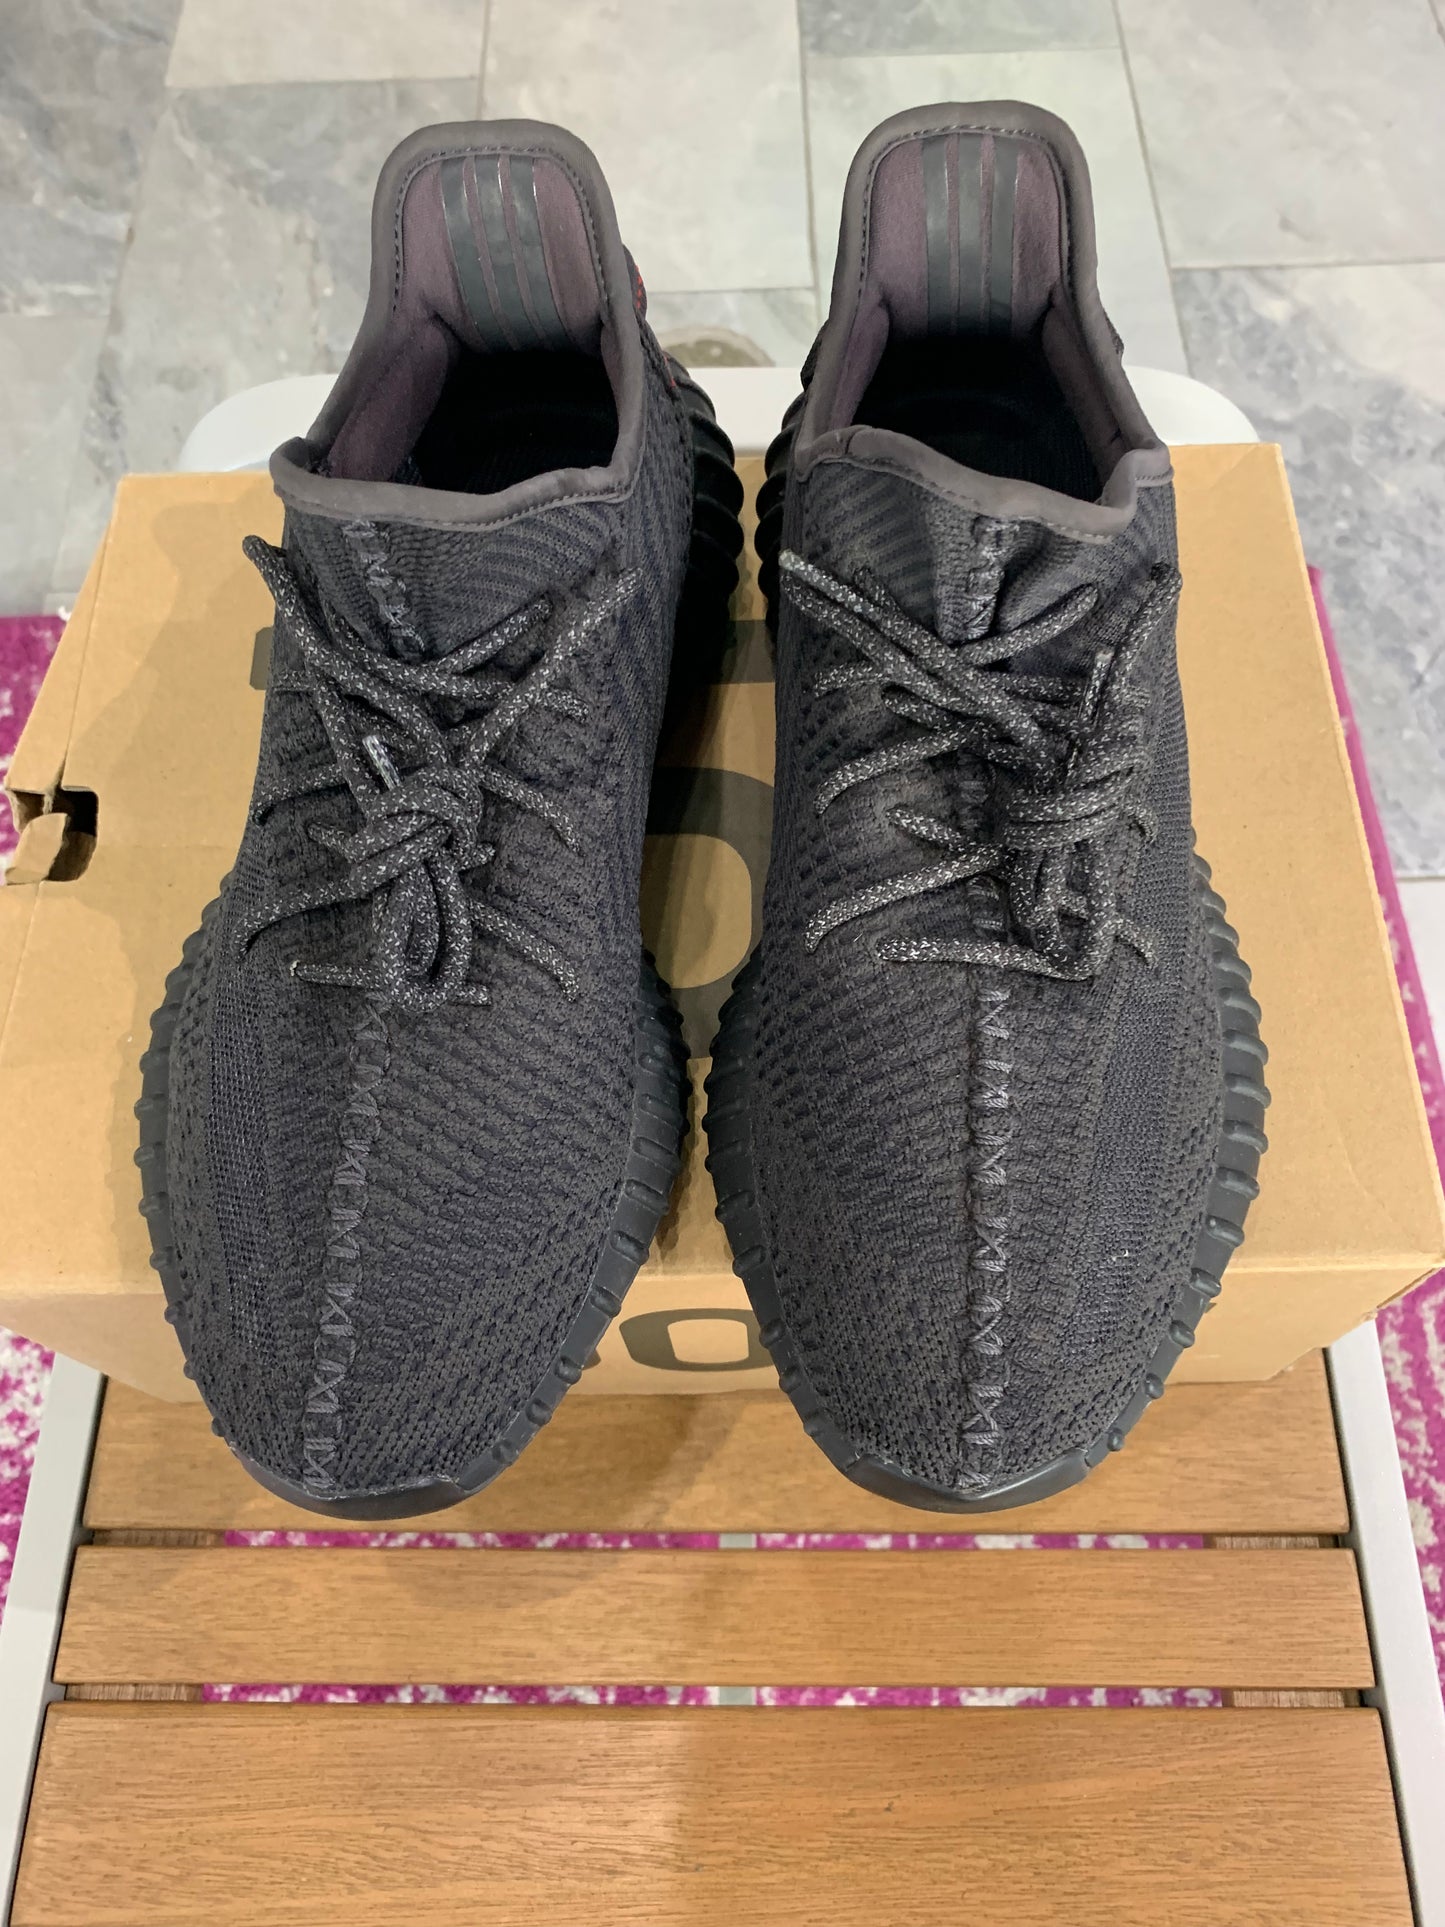 Yeezy Boost 350 Static Black Non Reflective (USED)